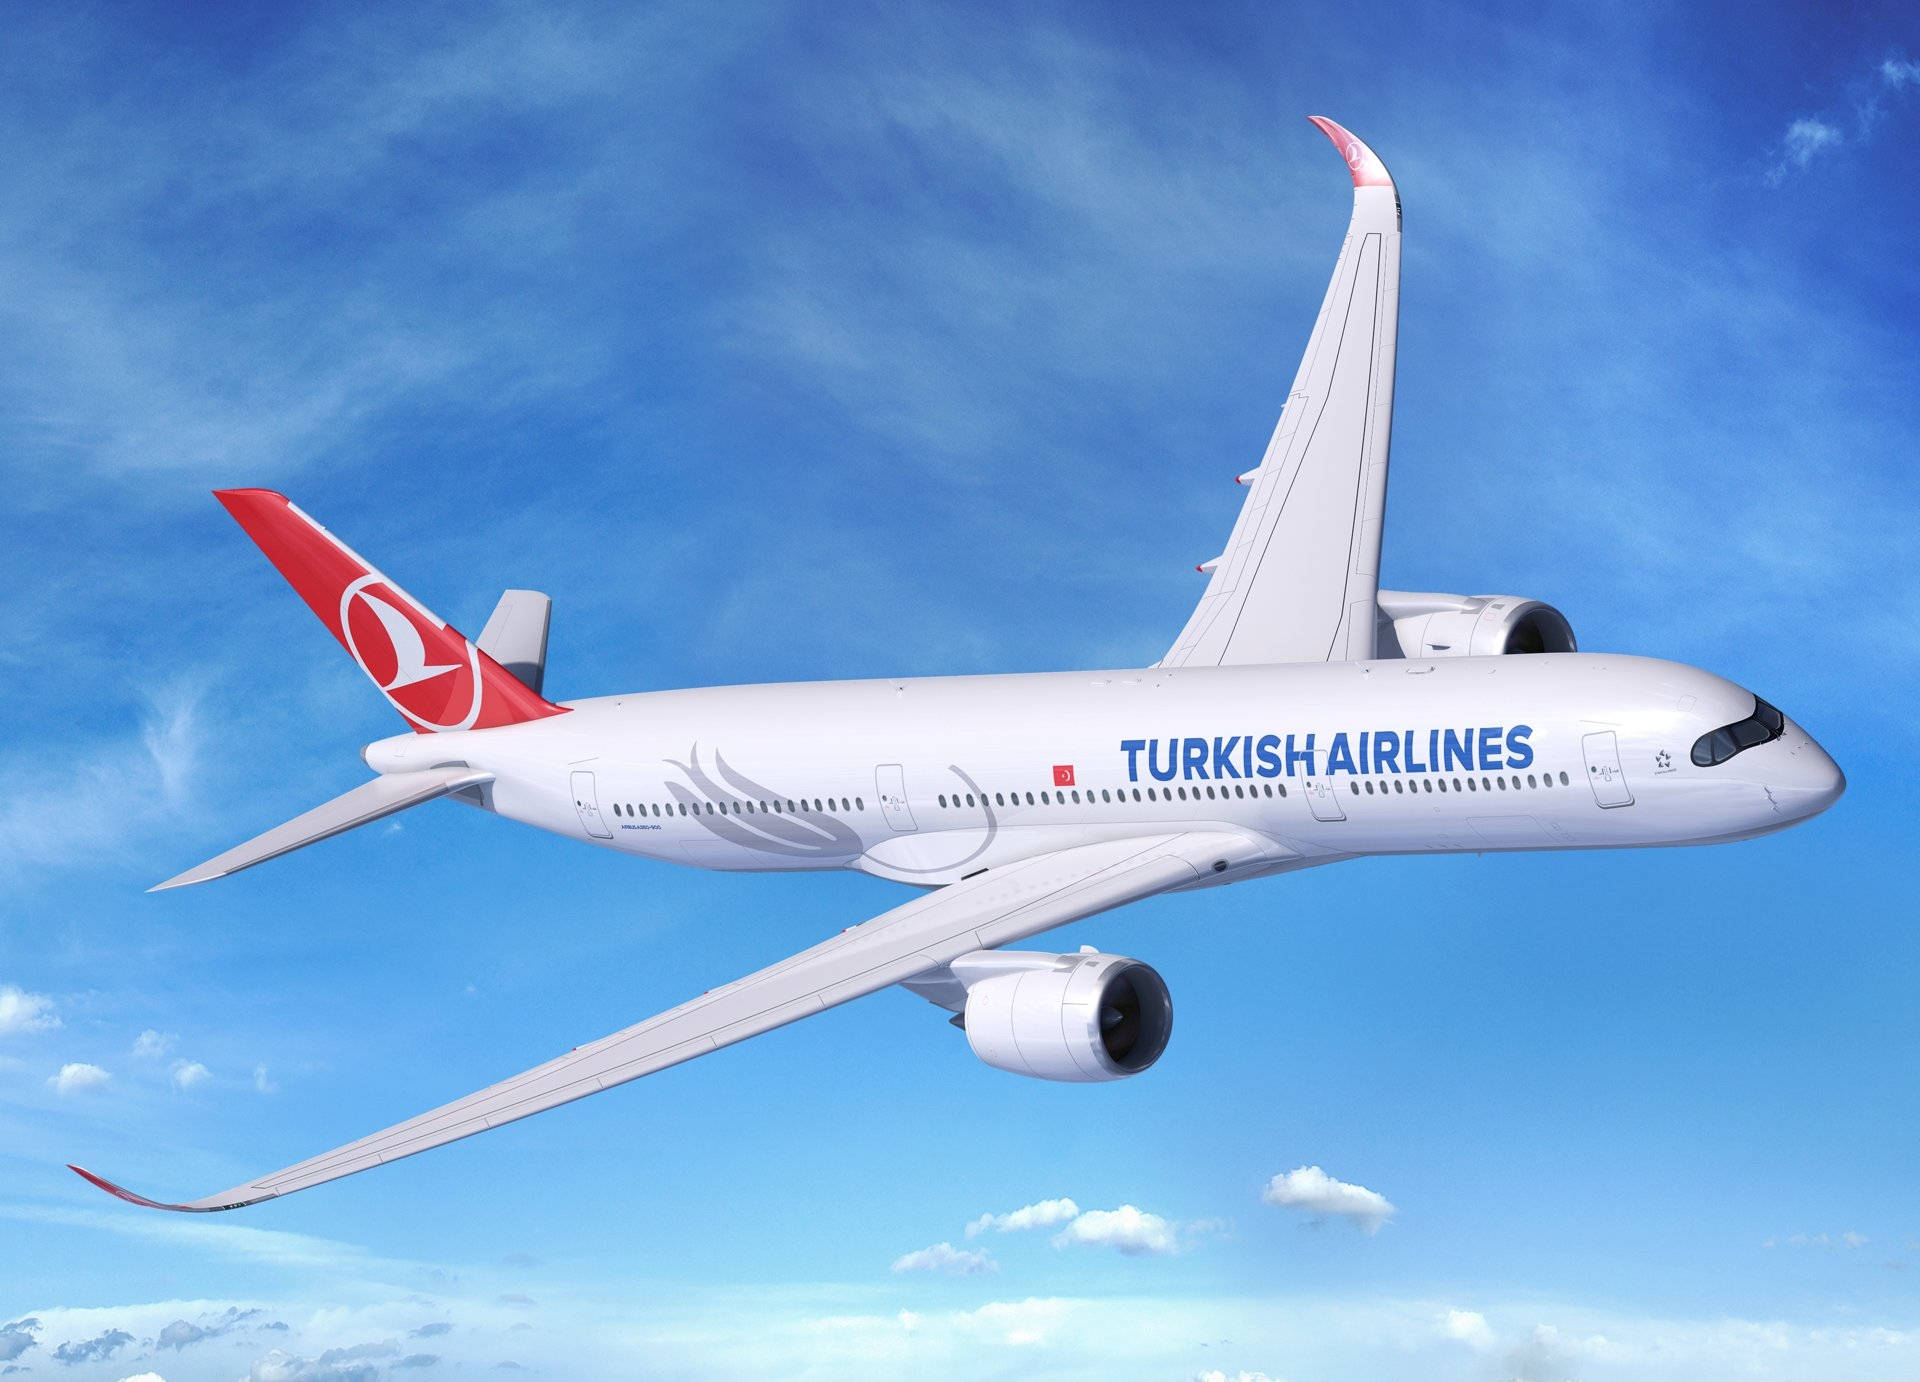 Top Turkish Airlines Wallpapers Full Hd K Free To Use